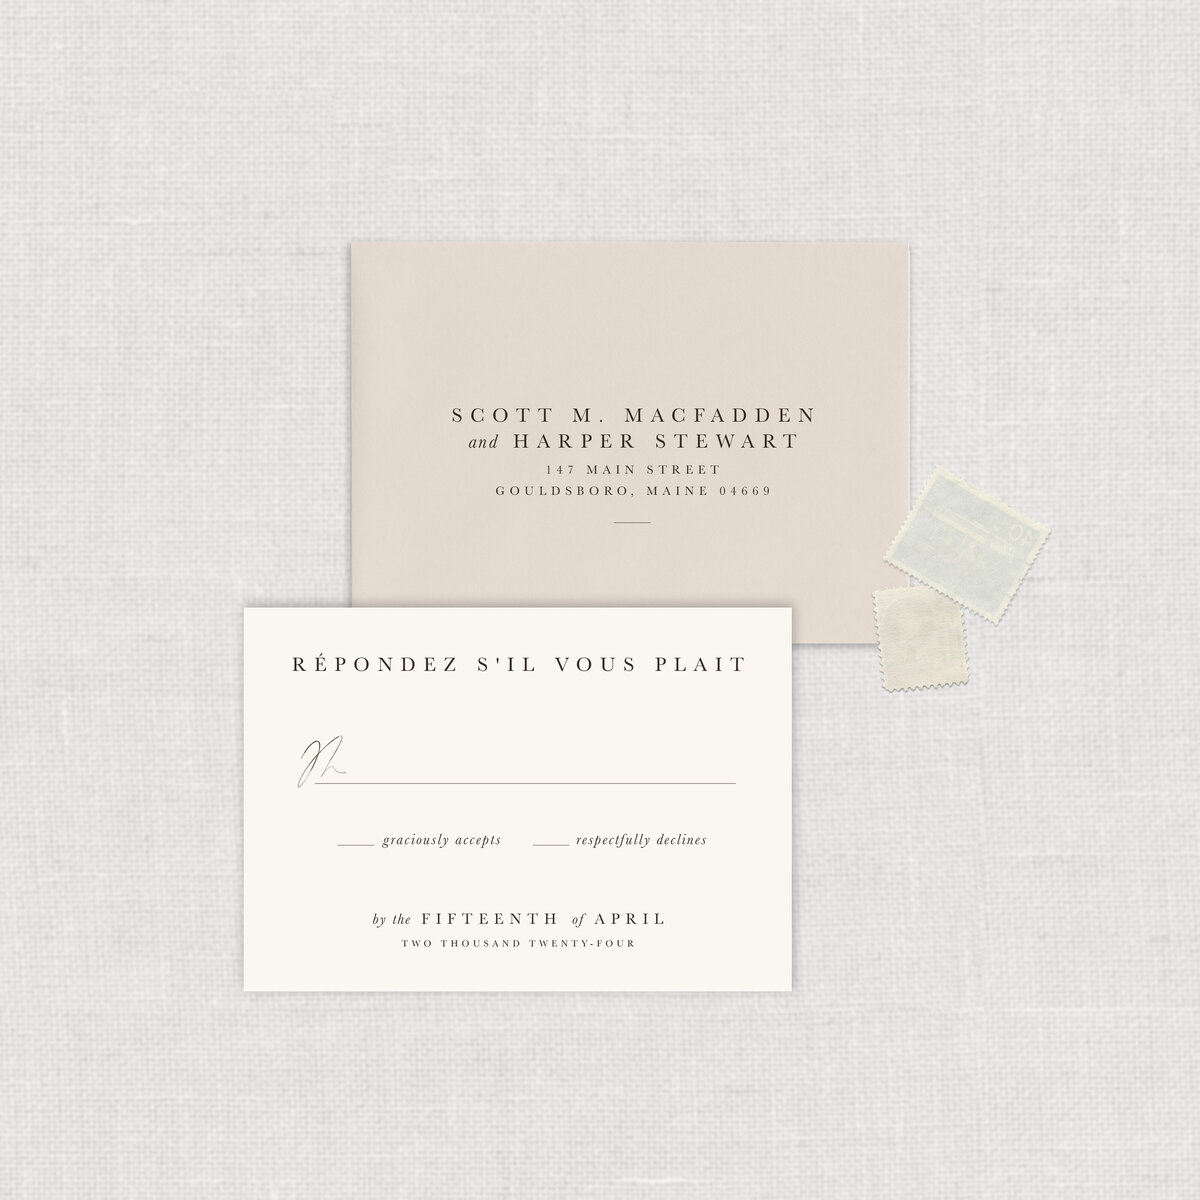 Romantic Italy Wedding Weekend Wedding Invitation with French RSVP card and envelope.